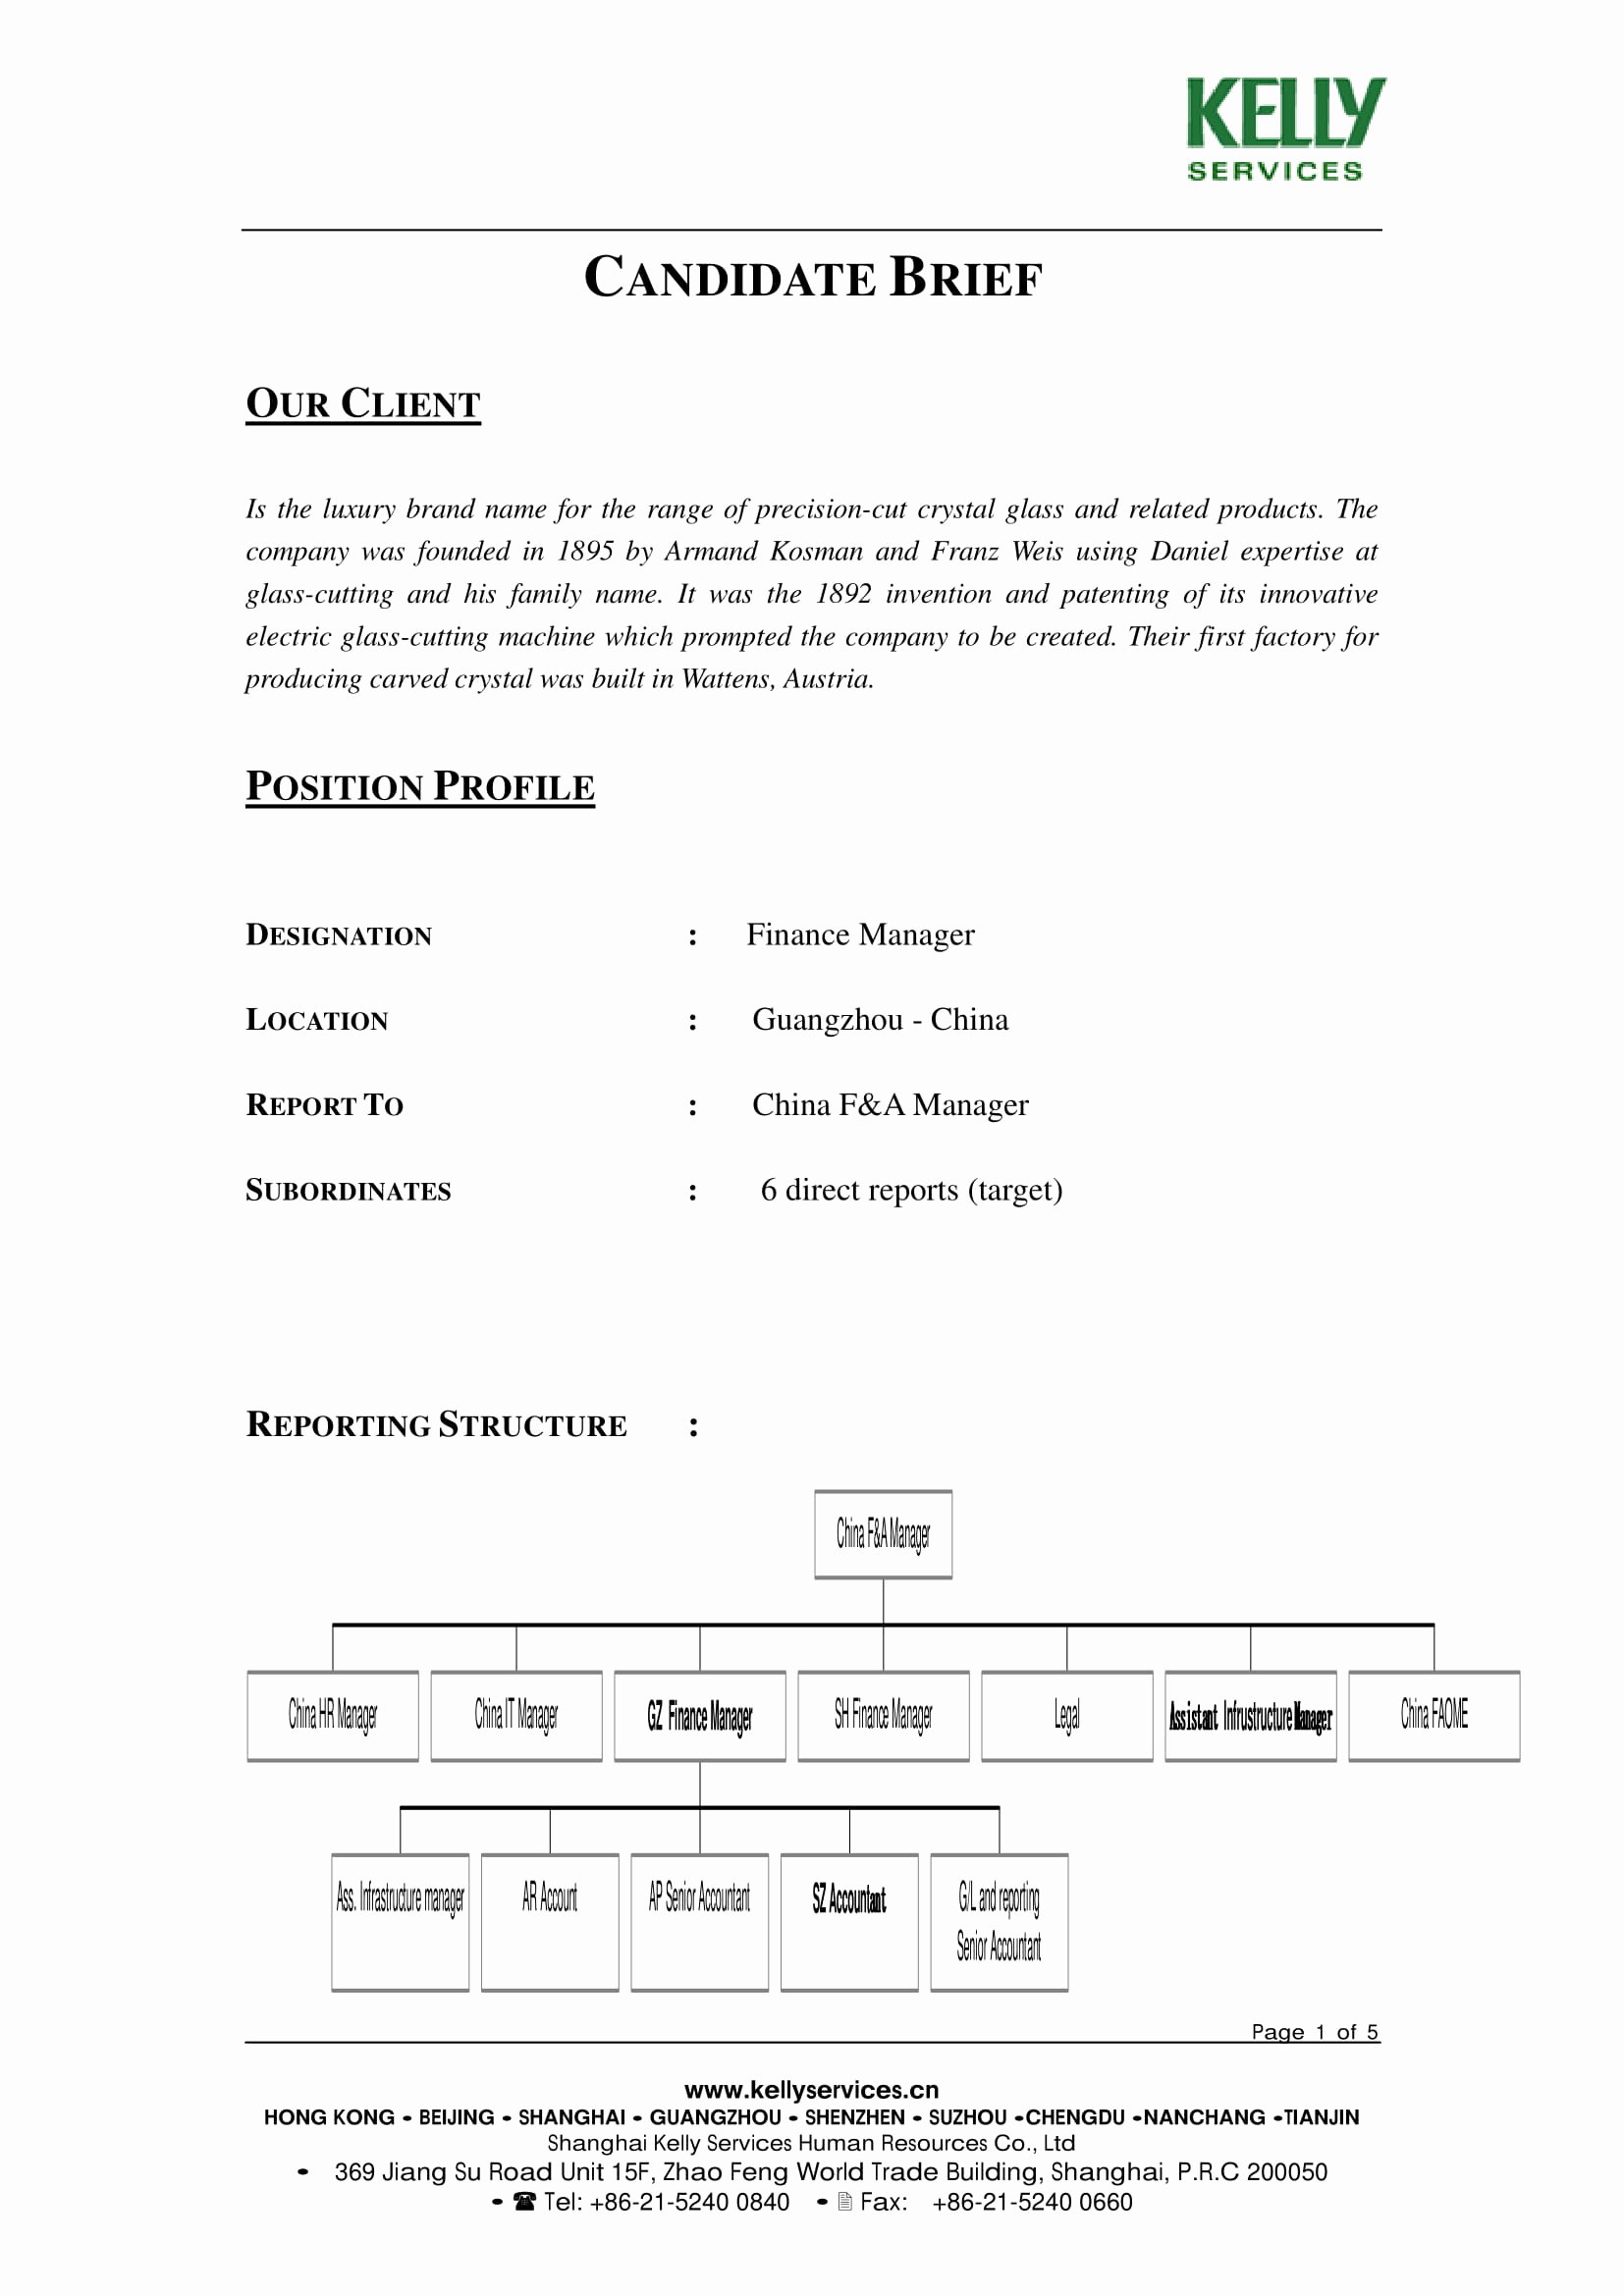 Policy Brief Template Download Inspirational 20 Brief Templates and Examples Pdf